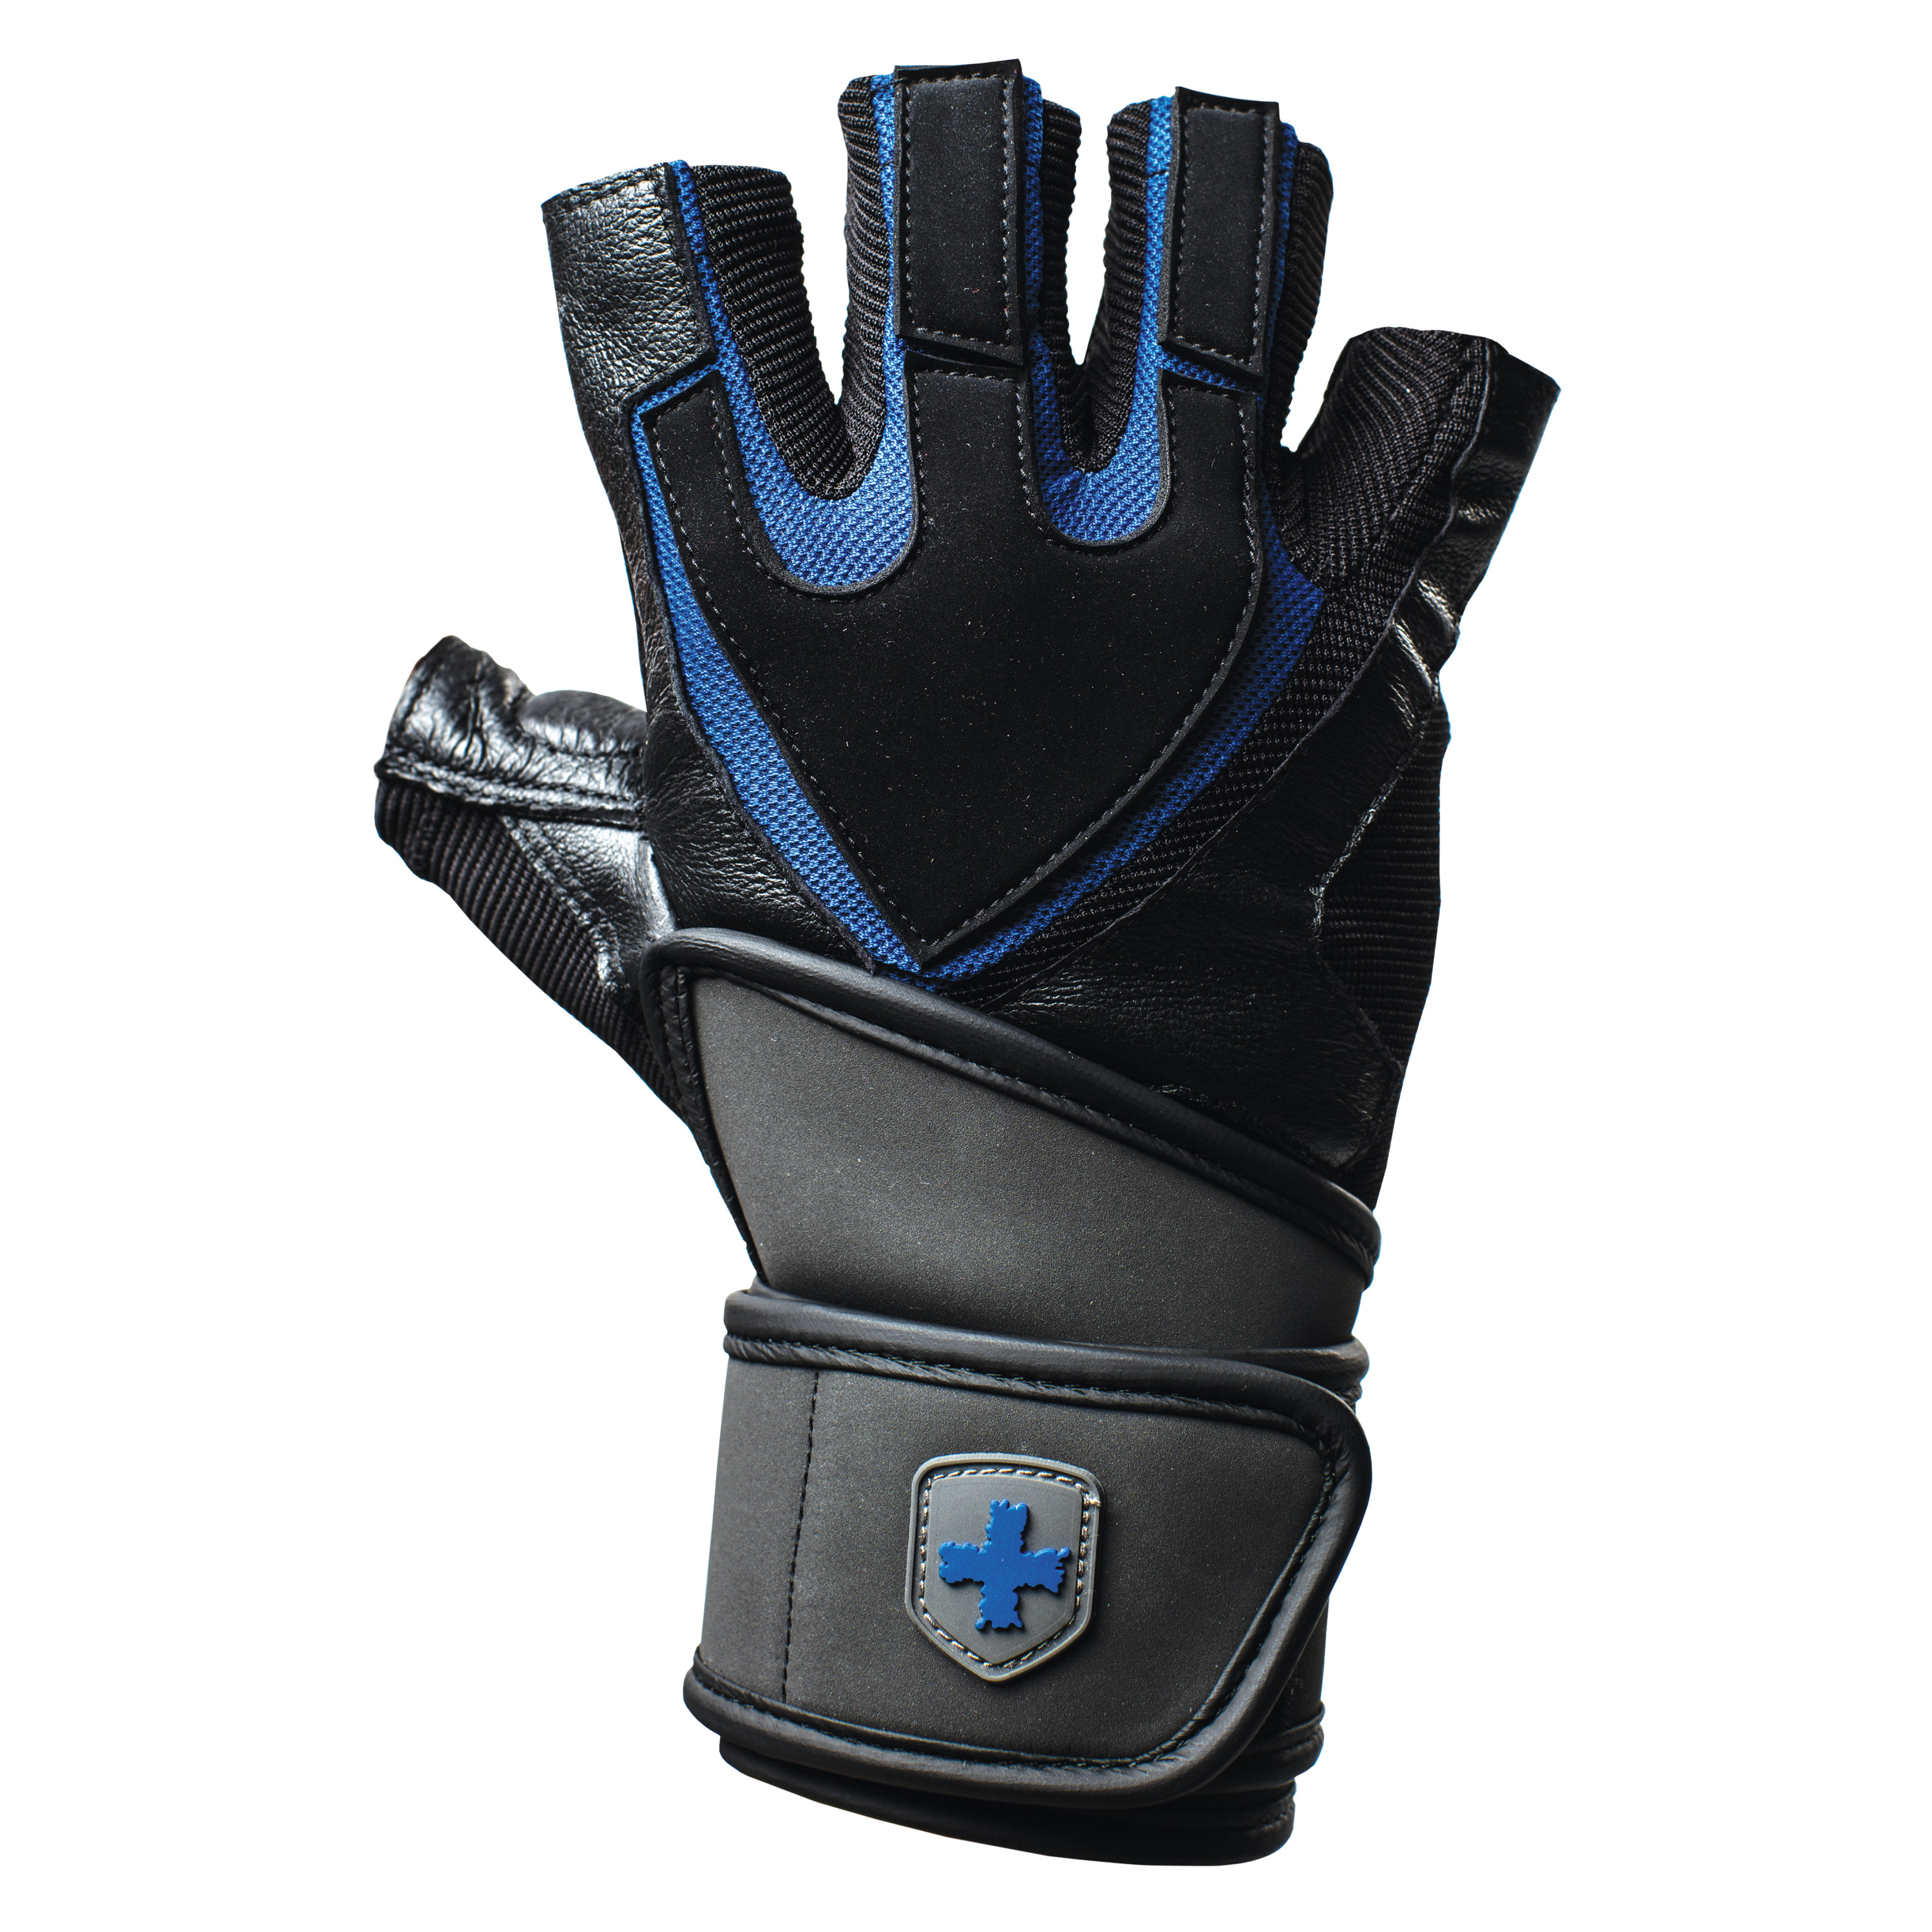 Harbinger Training Grip Wristwrap Weightlifting Gloves with TechGel-Padded Leather Palm (Pair), Small - image 1 of 8